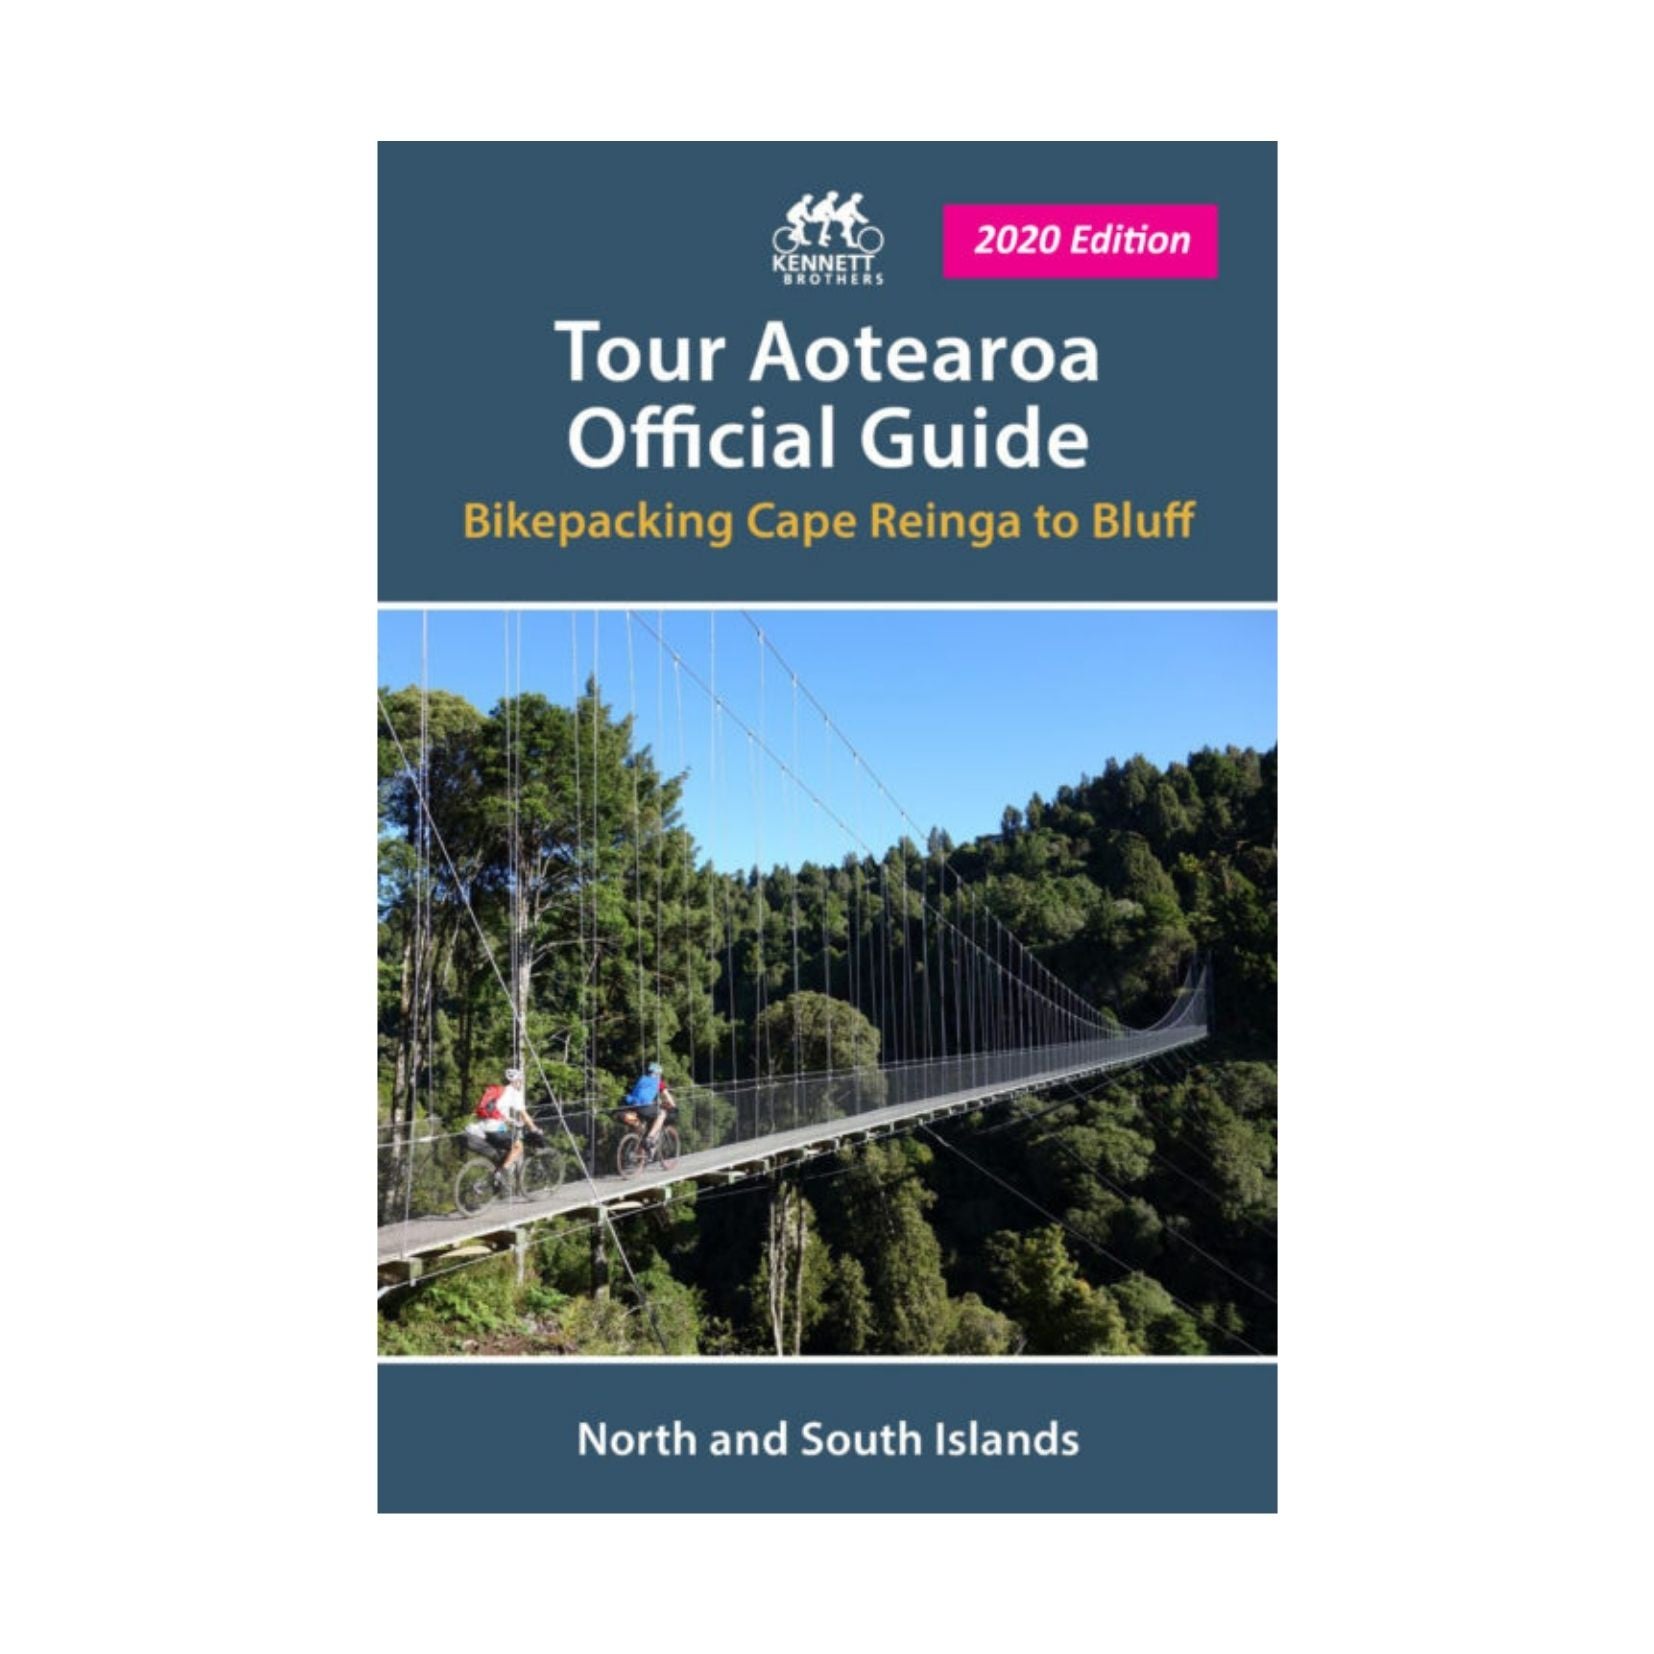 Tour Aotearoa Official Guide (Bikepacking) Petronella's Gallery and